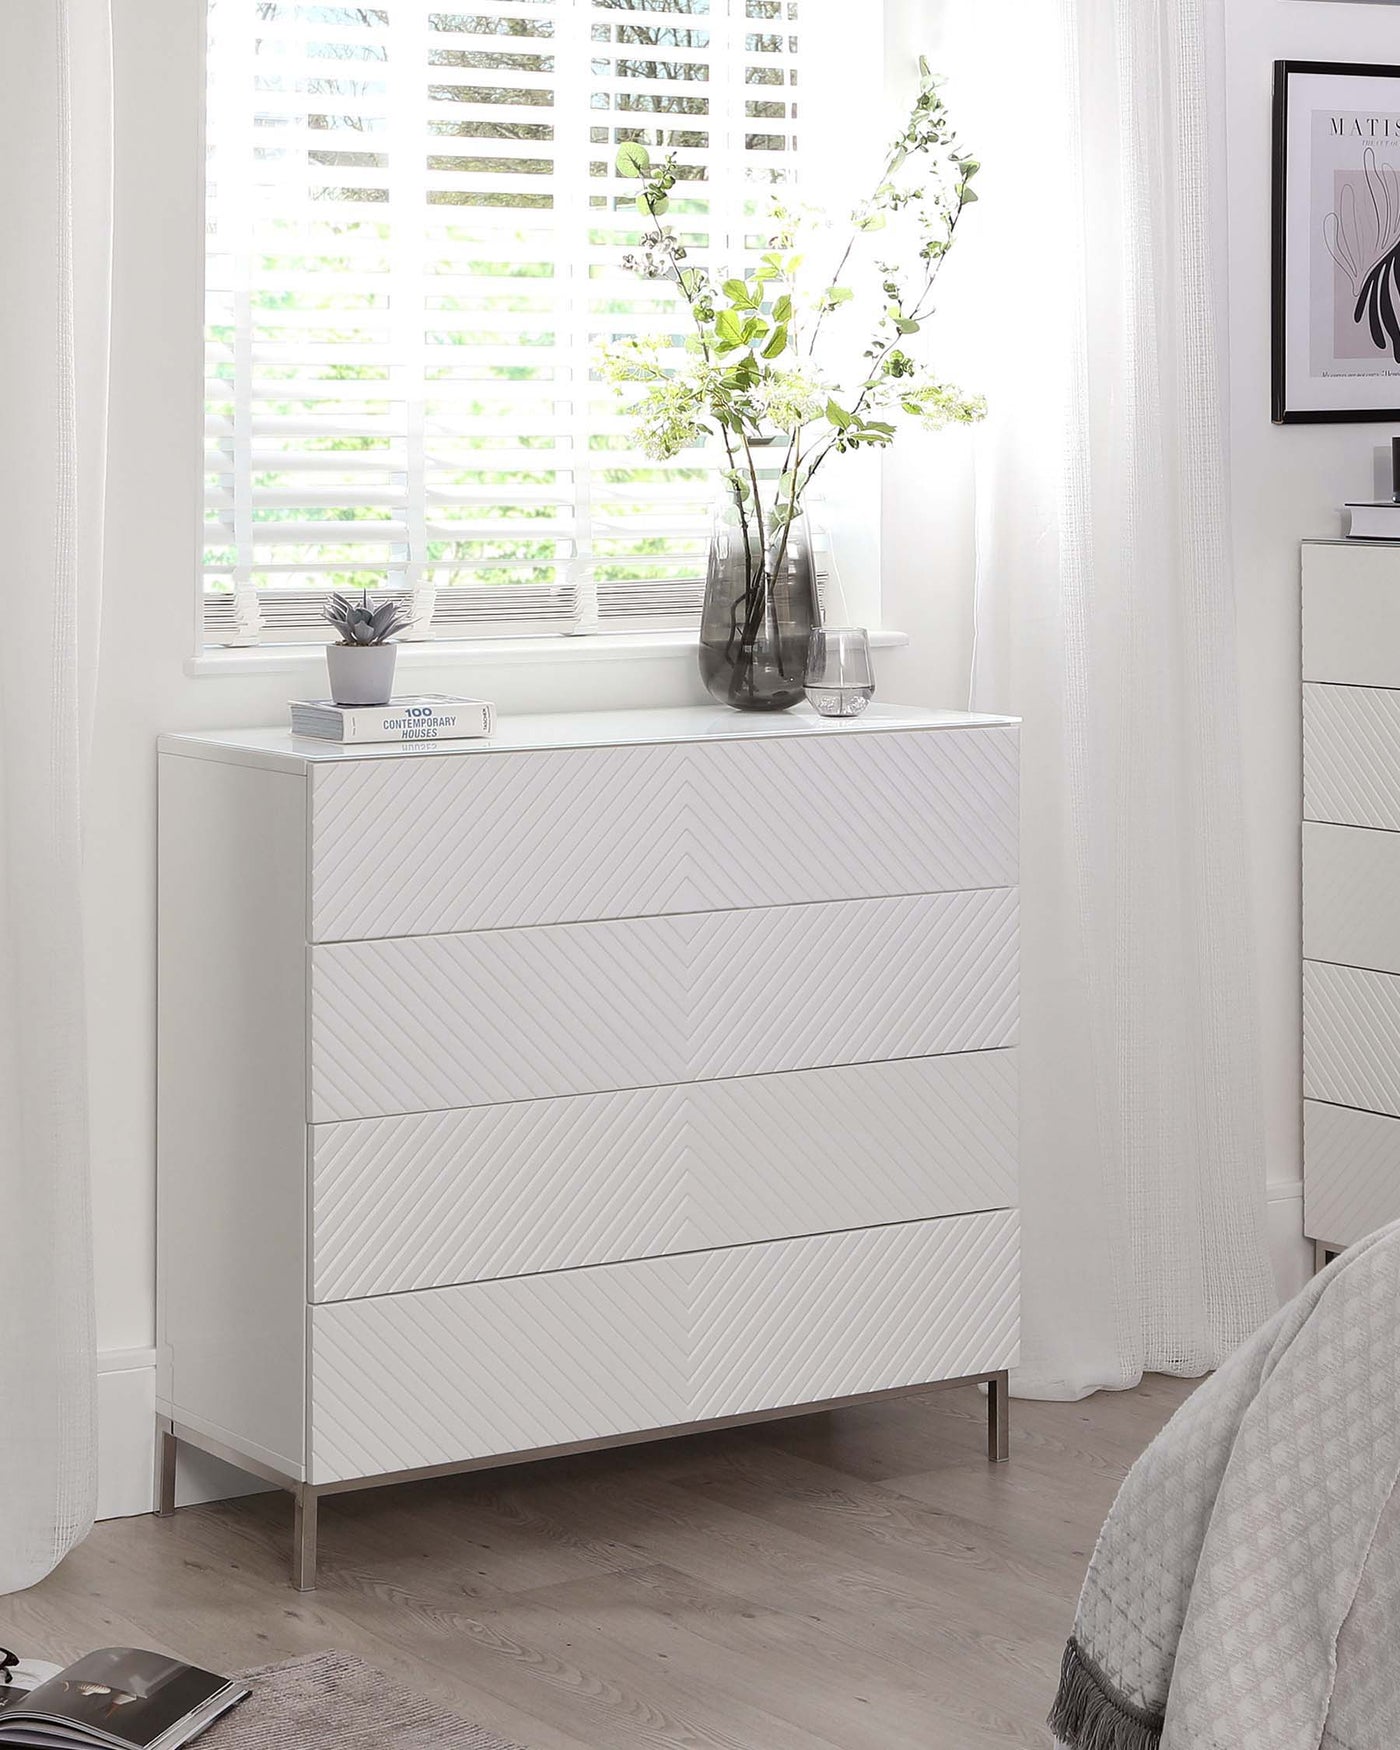 Modern white chest of drawers with a textured herringbone pattern on the fronts, complemented by sleek metallic handles and legs, staged in a bright room with natural light filtering through window shutters.